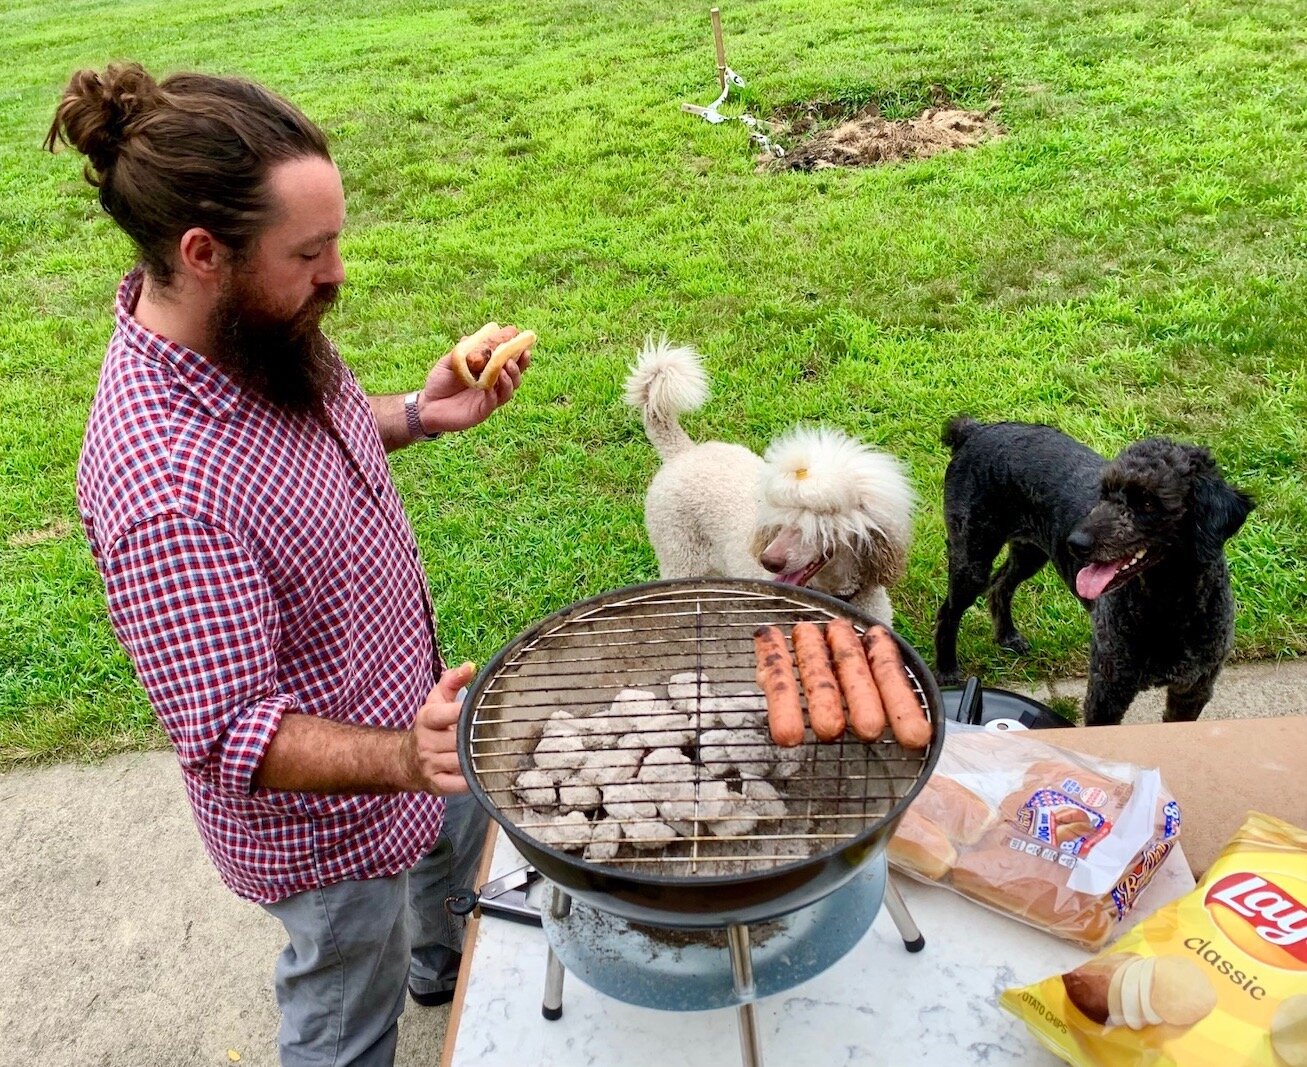 Benjamin Stanley grilled hotdogs on a Thursday afternoon to share with others at Fairmont Dog Park. His white poodle Maisie and black labradoodle Daisey are hoping he drops some food.